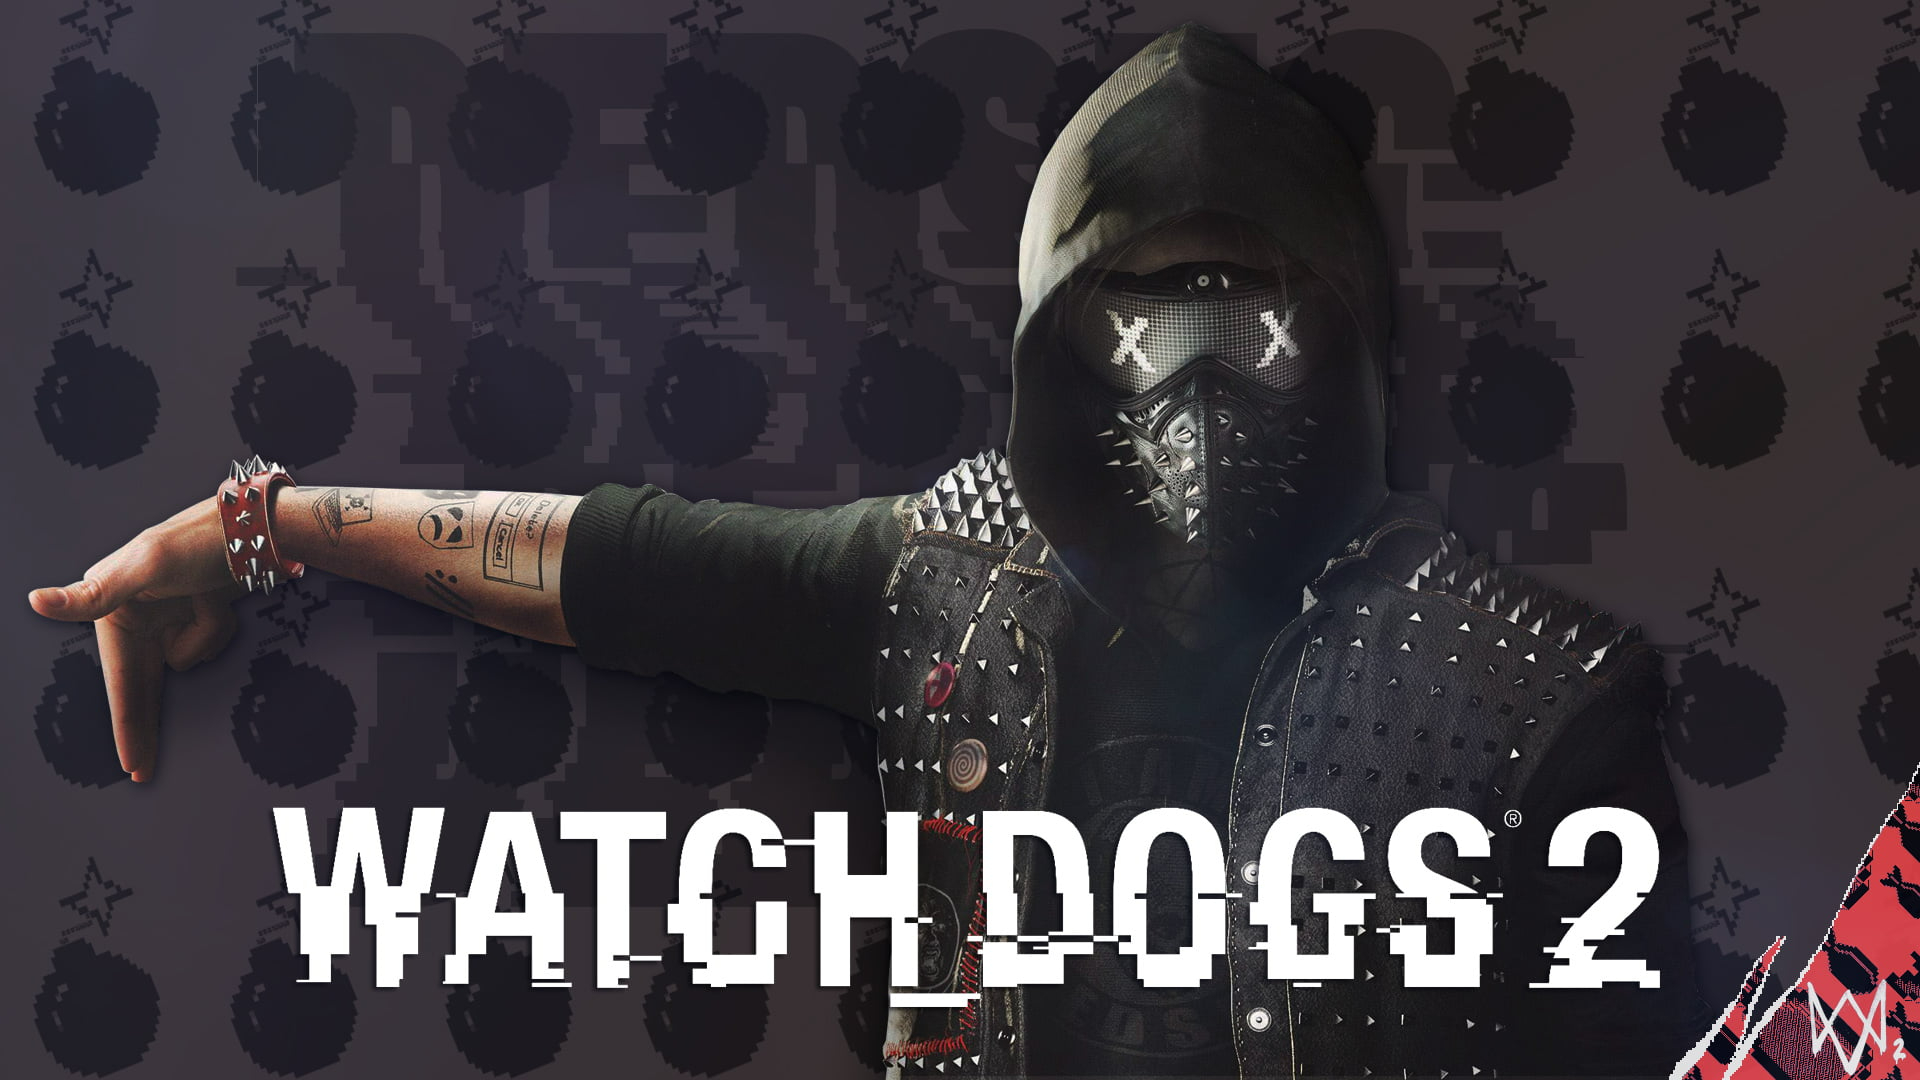 Top 7 Watch Dogs 2 Hacking Invasion Tips for Aspiring Hacktivists